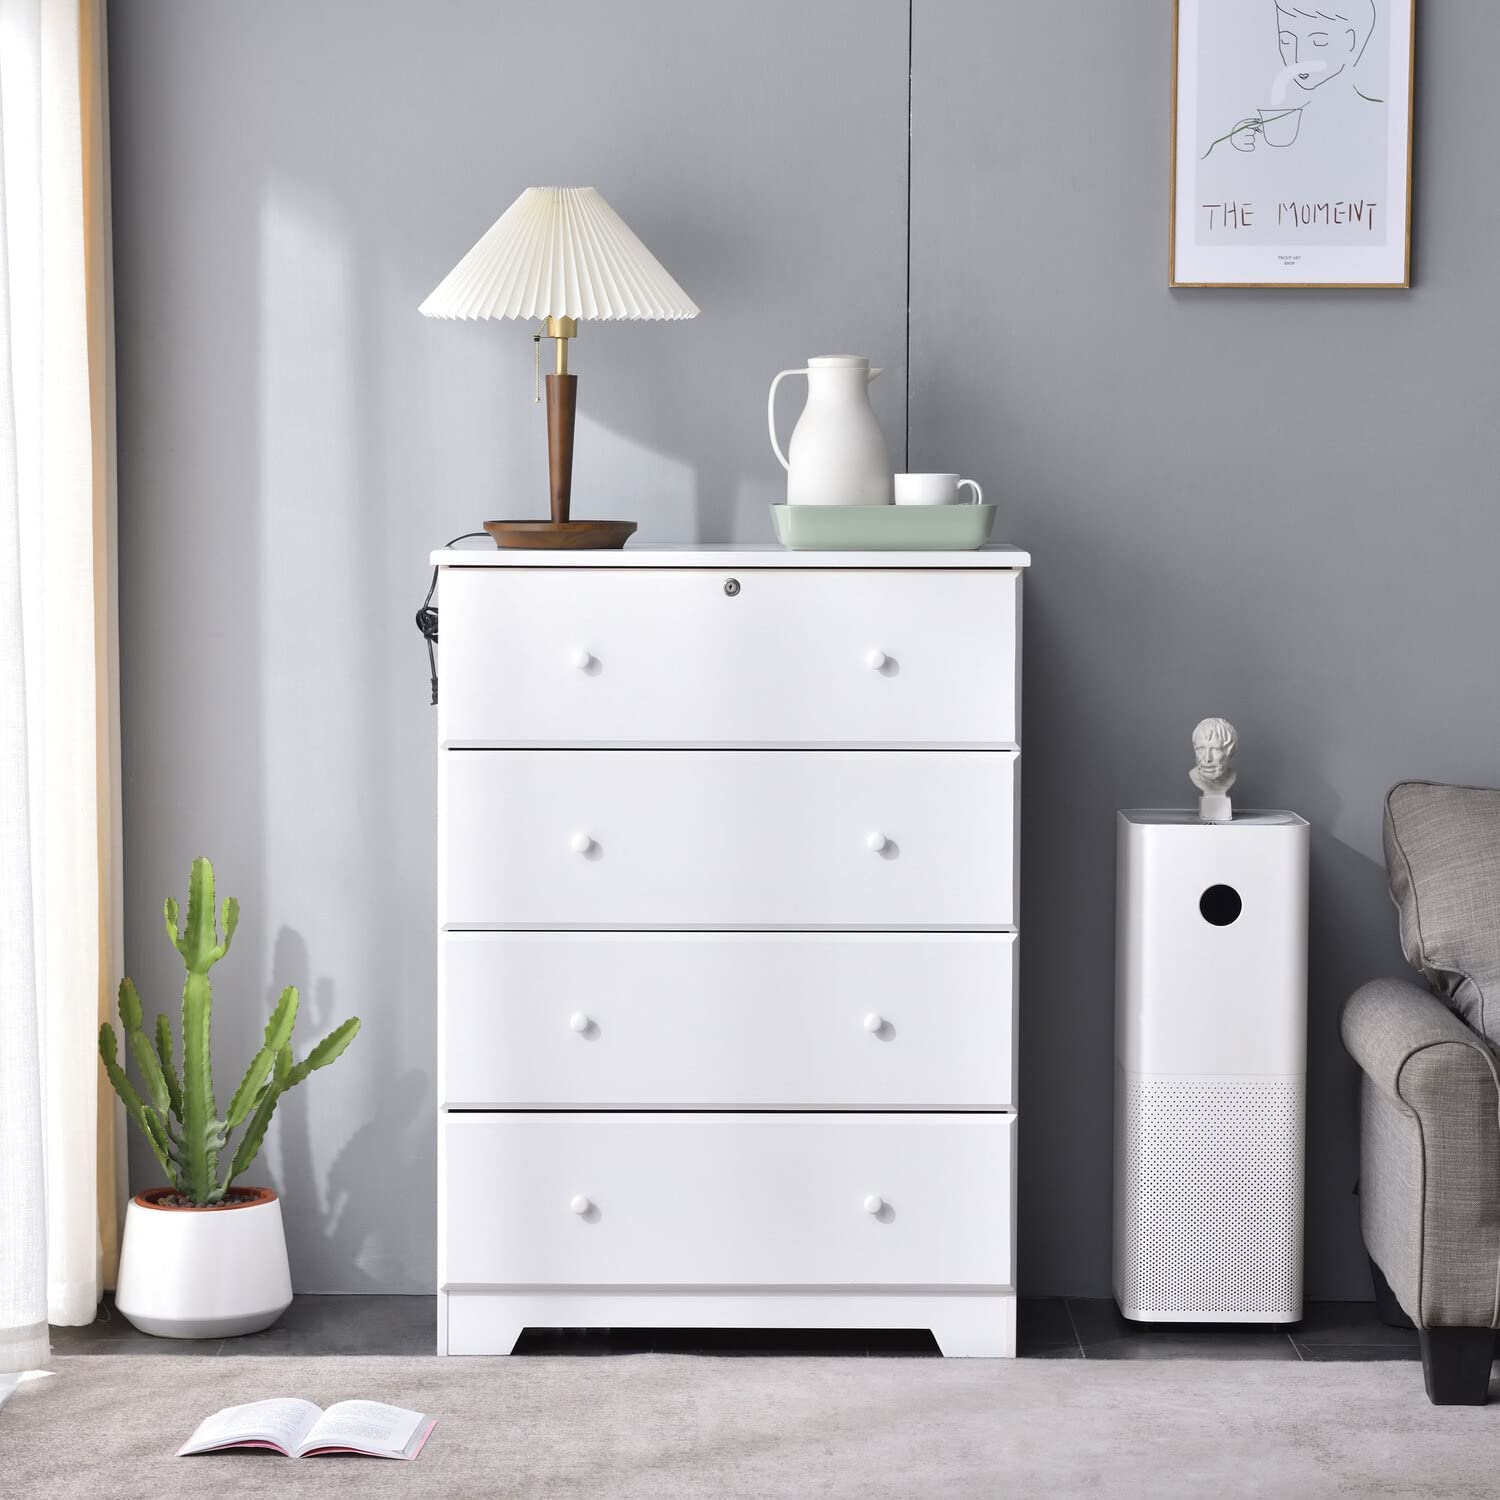 Better Home Products Isabela Solid Pine Wood 4 Drawer Chest Dresser in White